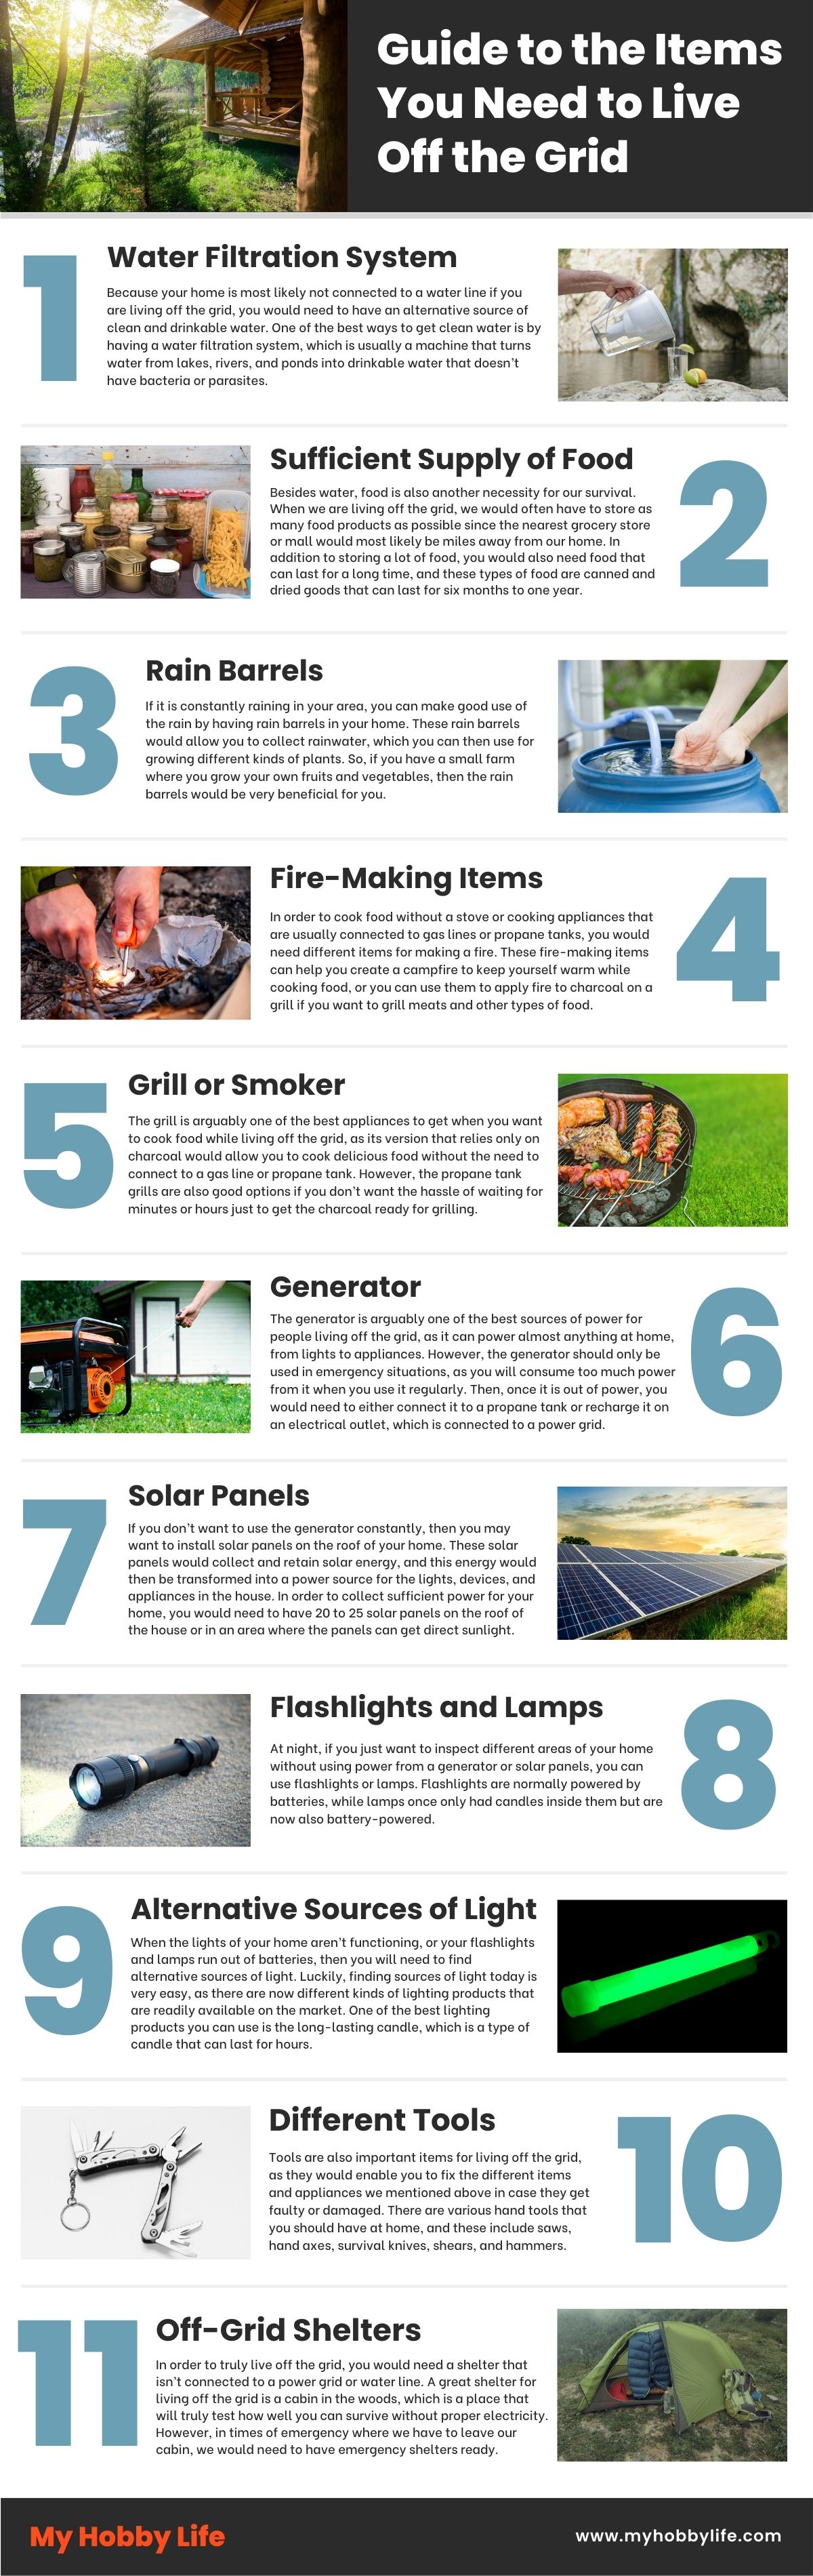 Items You Need for Off-Grid Living
